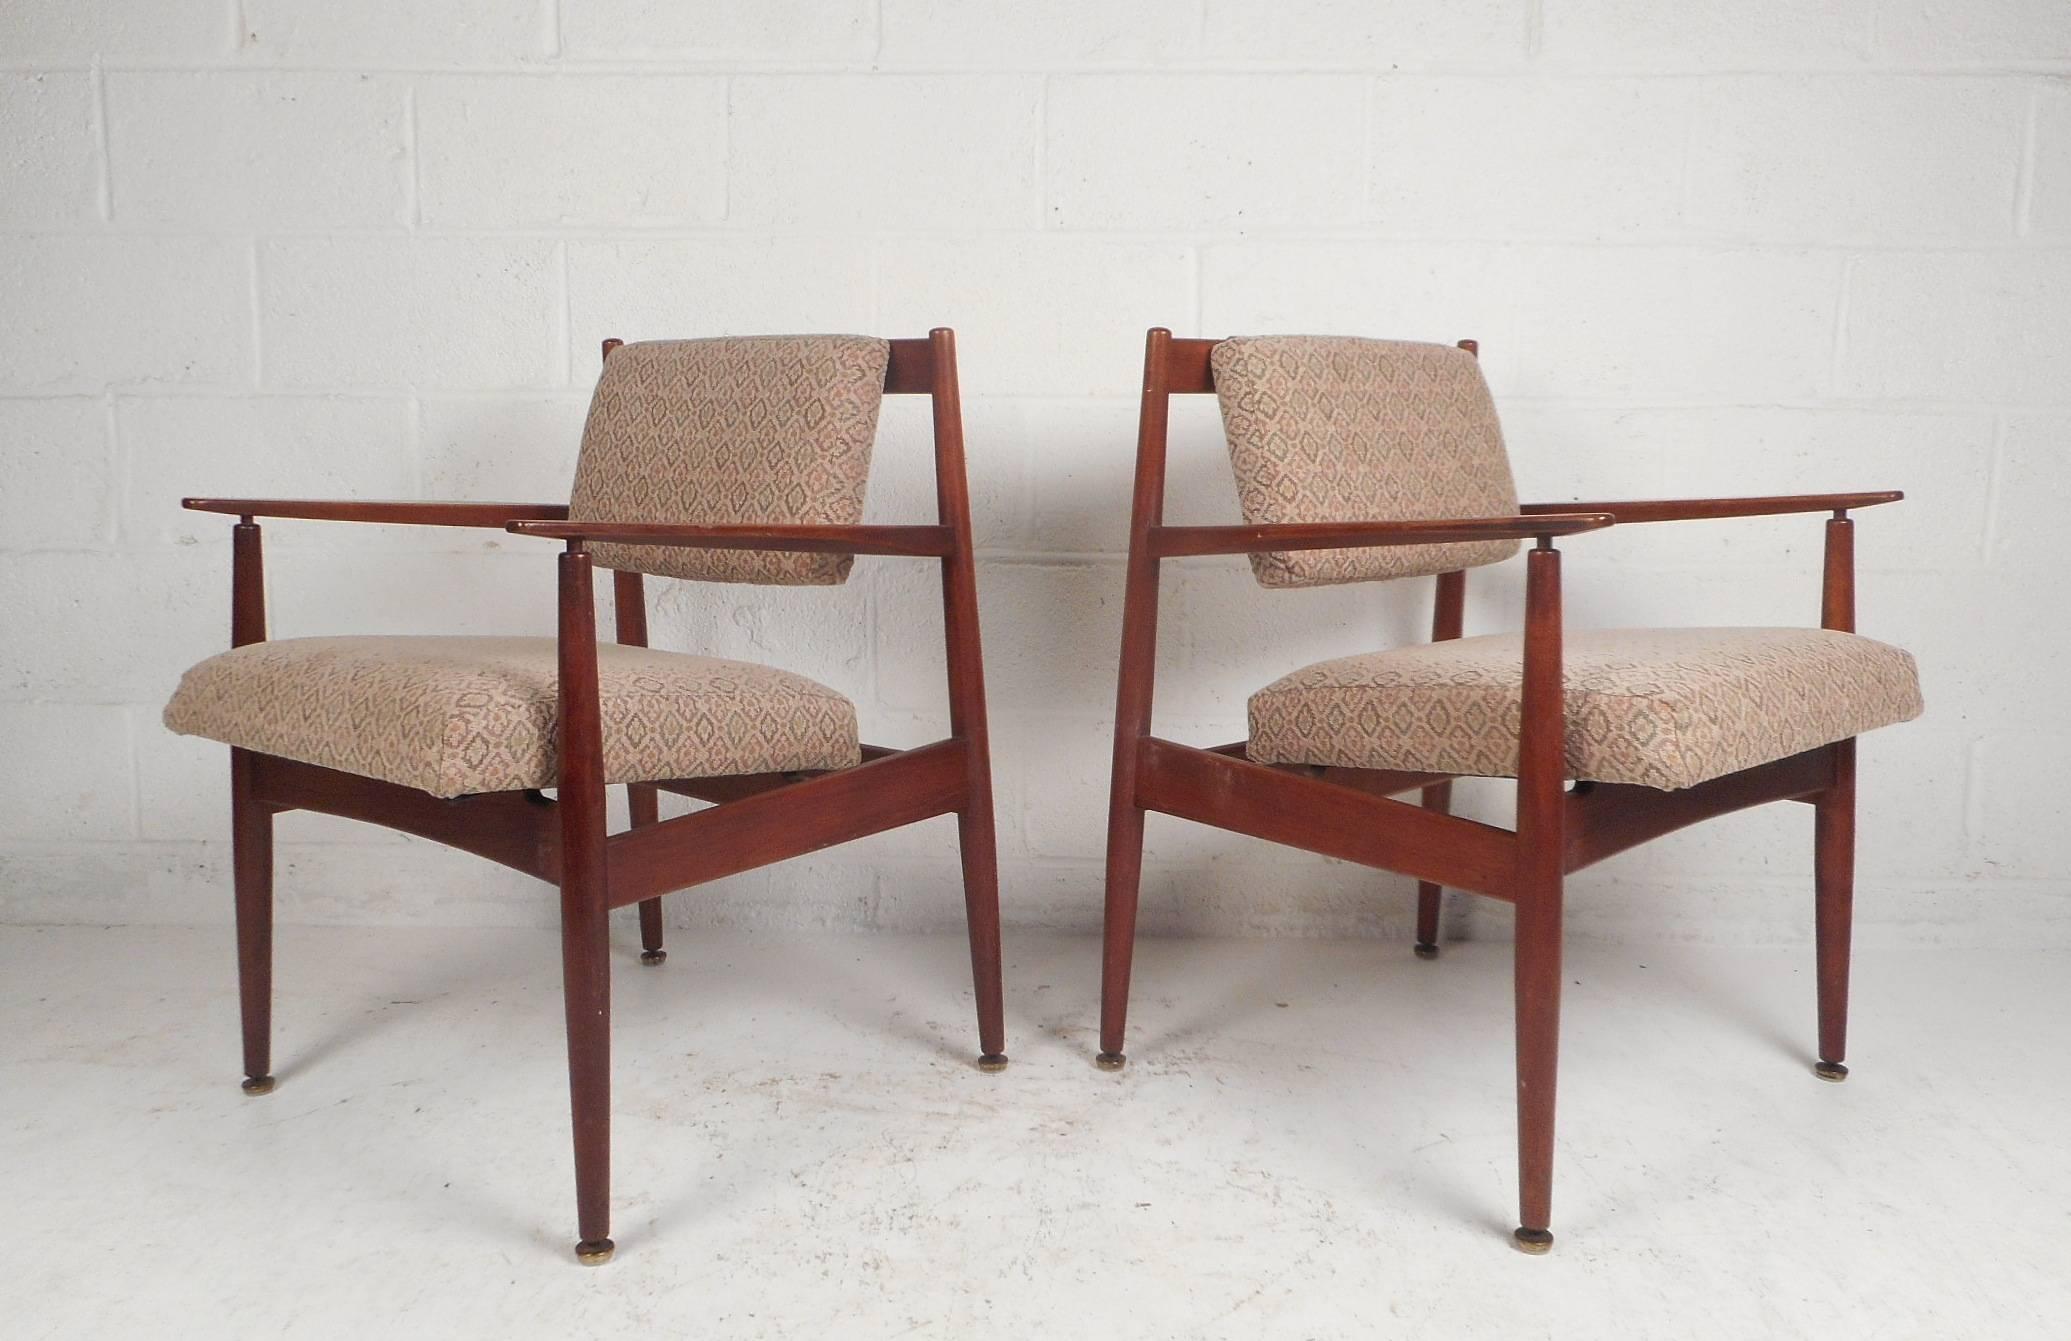 This stunning pair of Mid-Century Modern arm chairs by Jens Risom Design feature extremely thick padded seating, a floating style backrest, and sculpted arm rests. A sturdy walnut frame and lovely decorative upholstery add to the allure. This